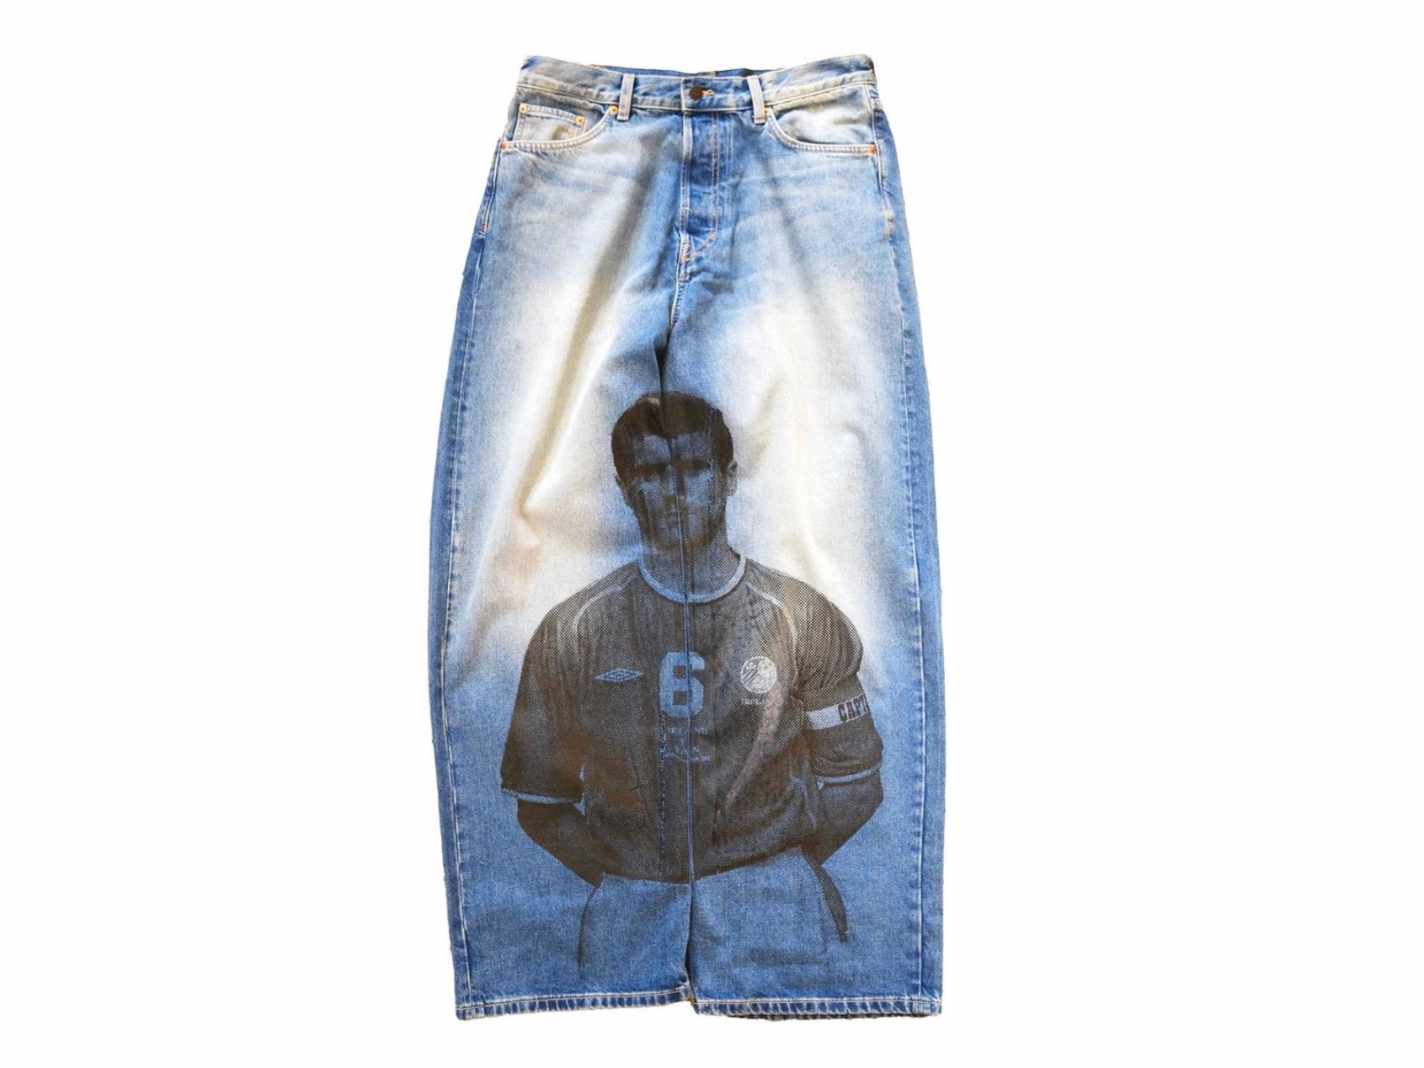 Twitter Reacts as Roy Keane’s Face Makes it Onto a Pair of Jeans